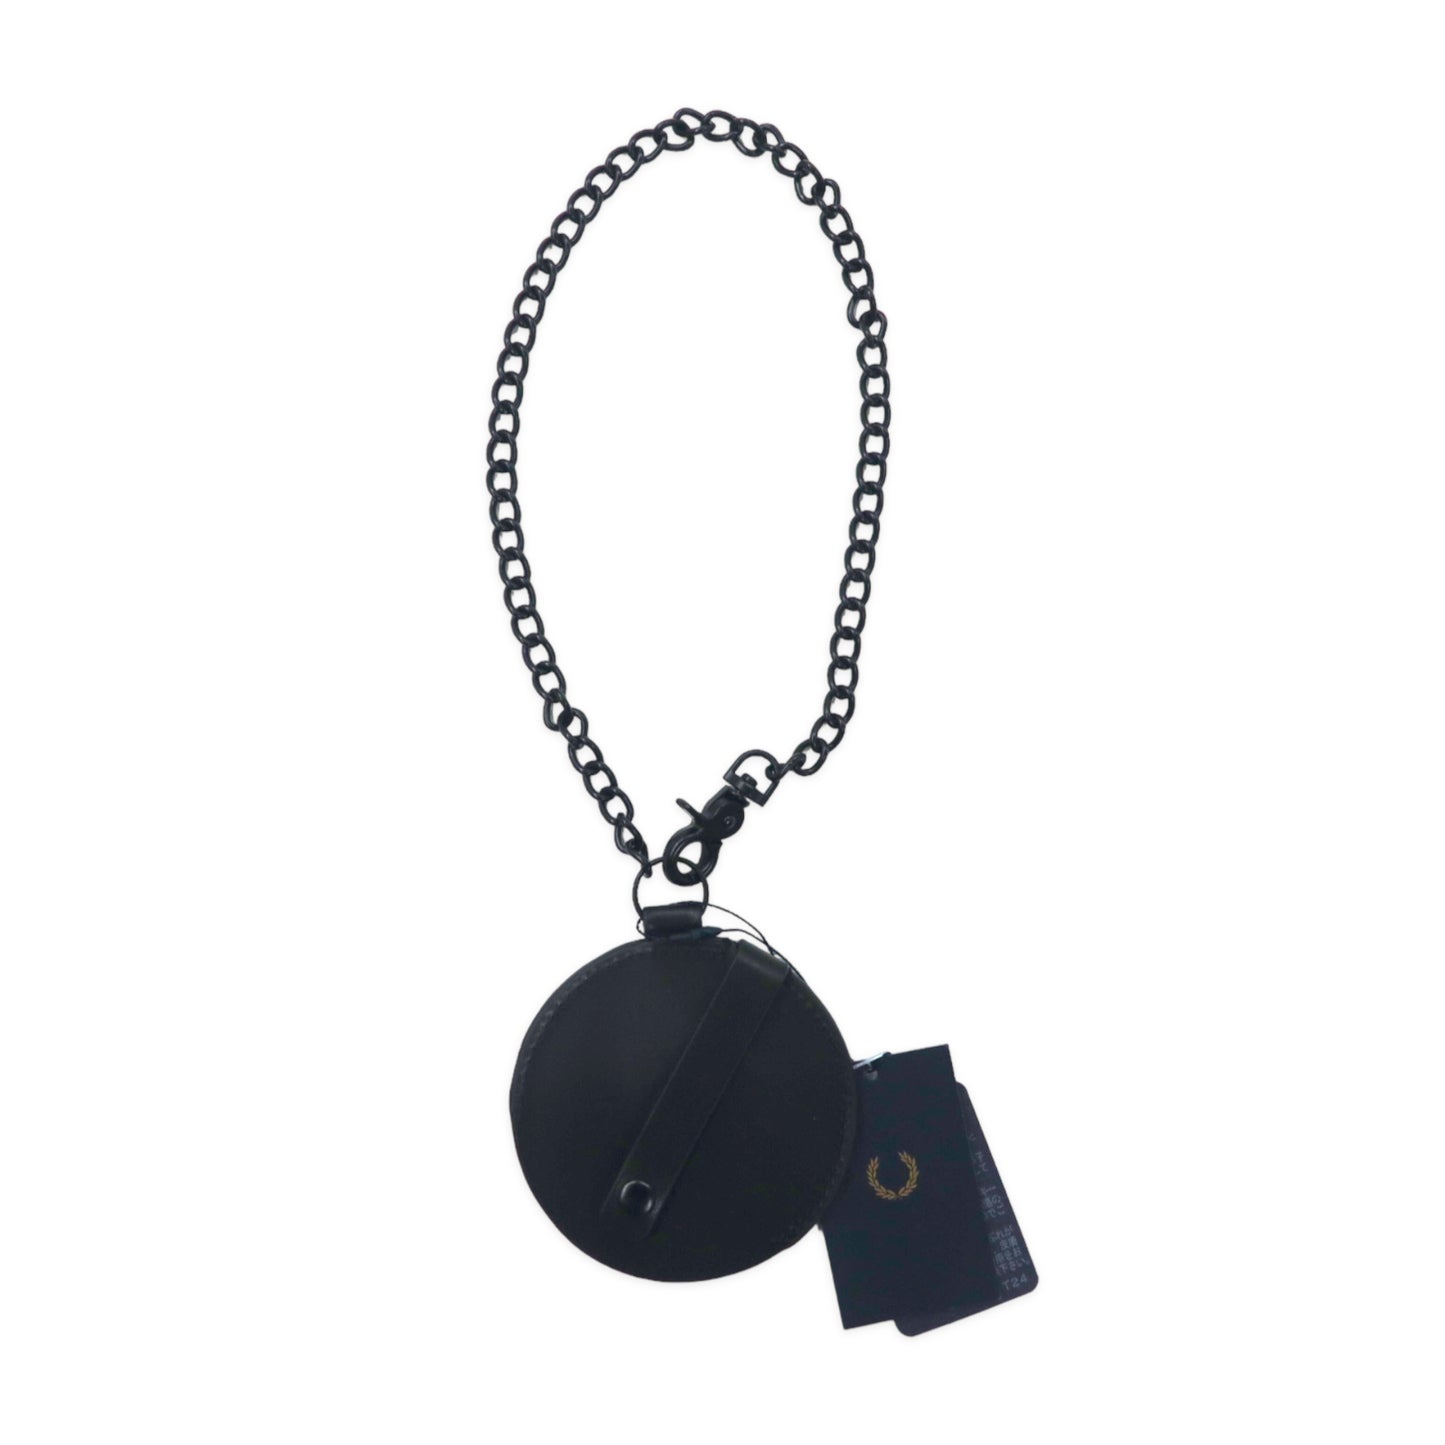 FRED PERRY レザー キーチェーン ウェレットチェーン ブラック LAUREL WREATH LEATHER KEY FOB L2306 未使用品